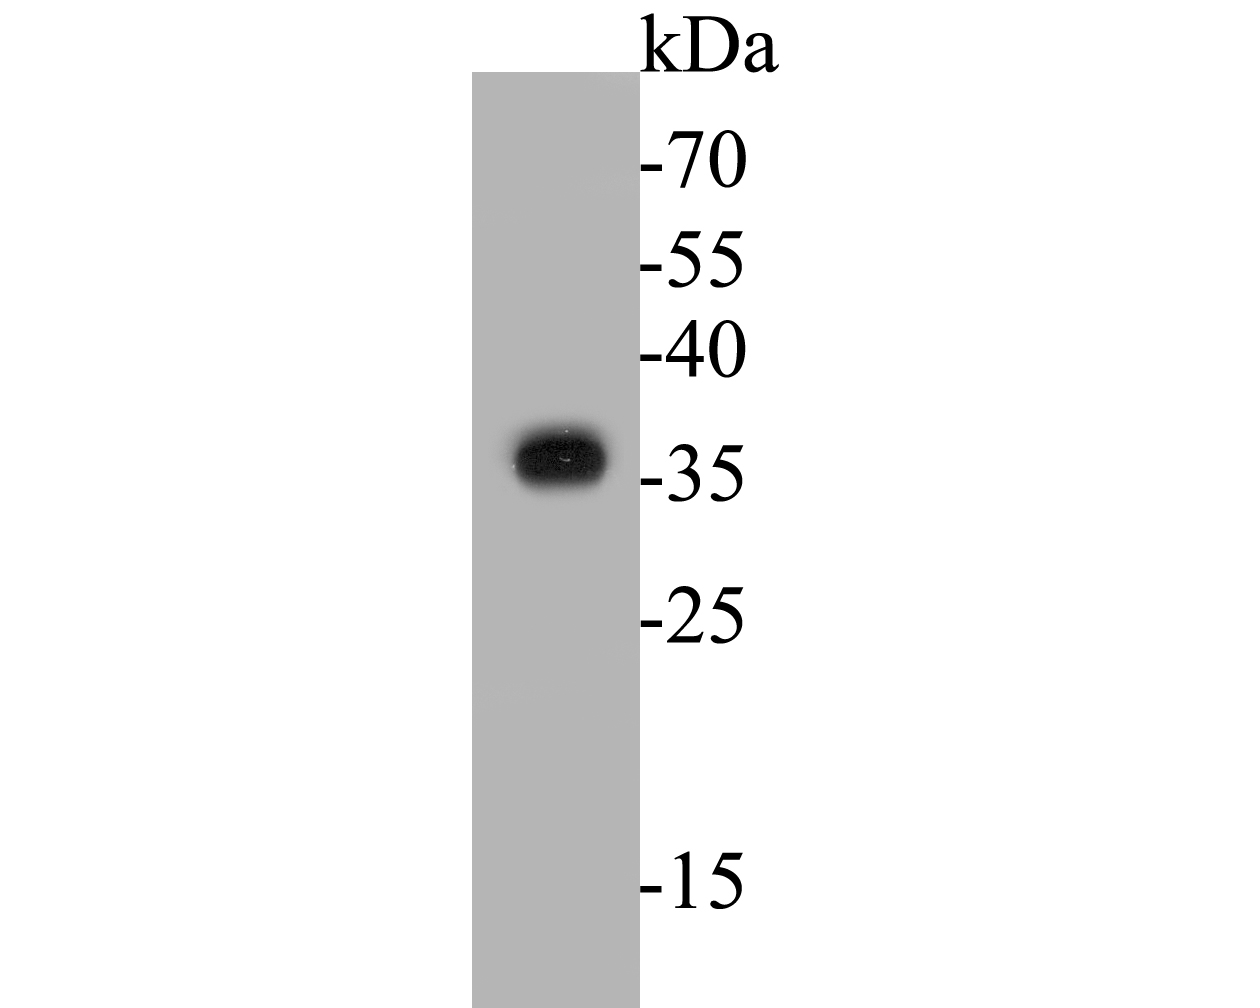 Western blot analysis of TMX1 on Daudi cell lysates. Proteins were transferred to a PVDF membrane and blocked with 5% BSA in PBS for 1 hour at room temperature. The primary antibody (ER1901-36, 1/500) was used in 5% BSA at room temperature for 2 hours. Goat Anti-Rabbit IgG - HRP Secondary Antibody (HA1001) at 1:5,000 dilution was used for 1 hour at room temperature.